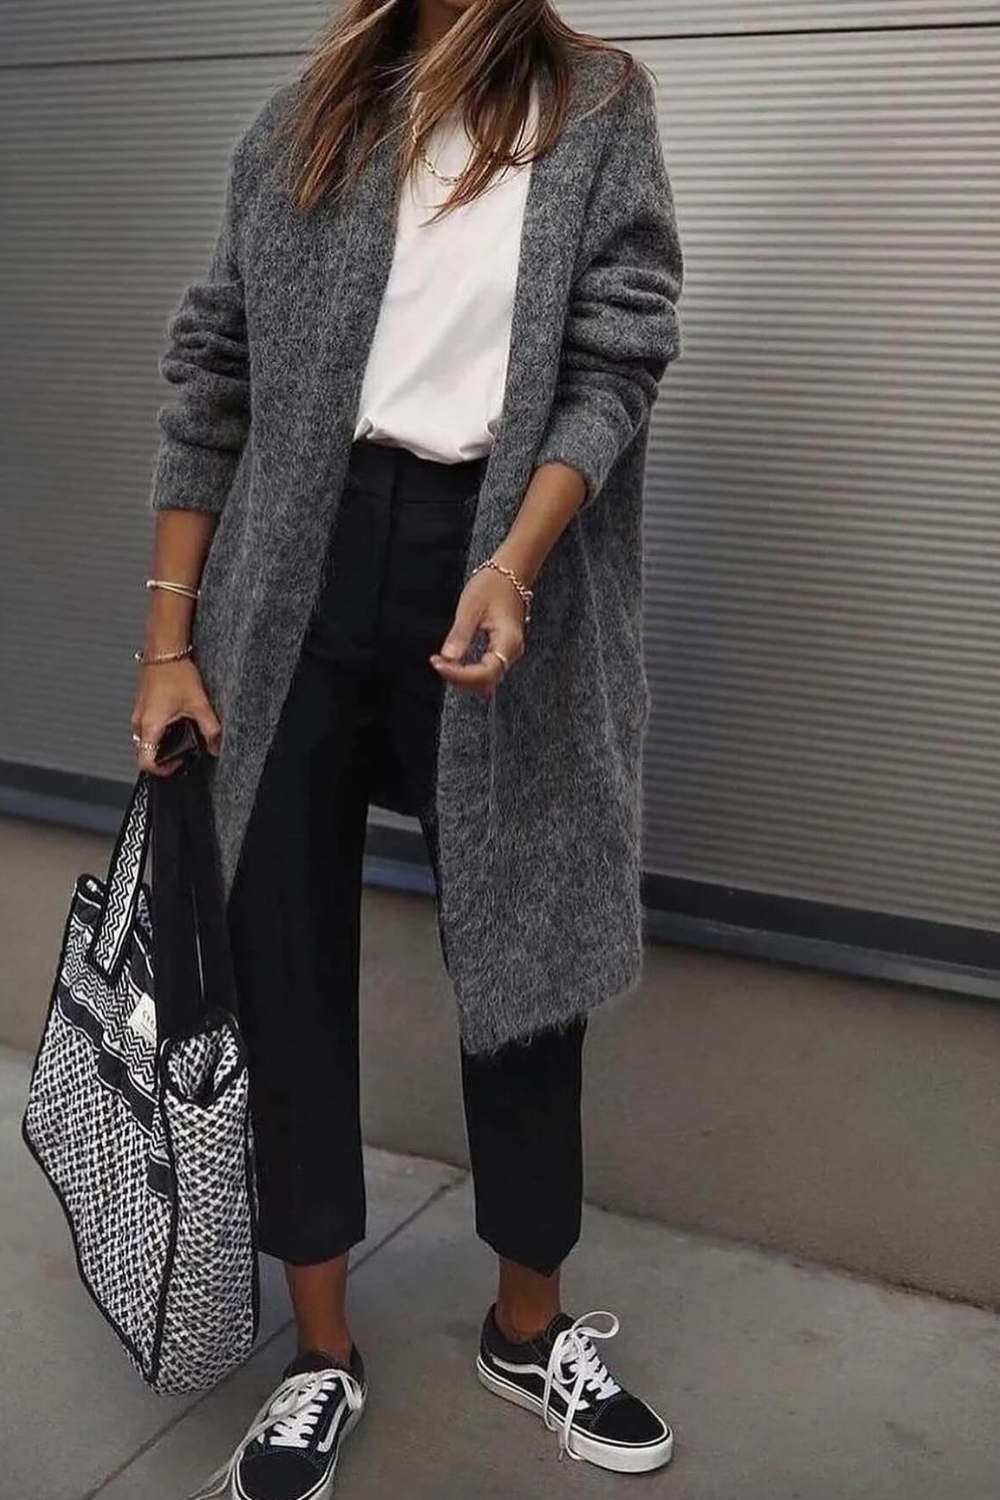 Sporty Work Outfits - Long Cardigan